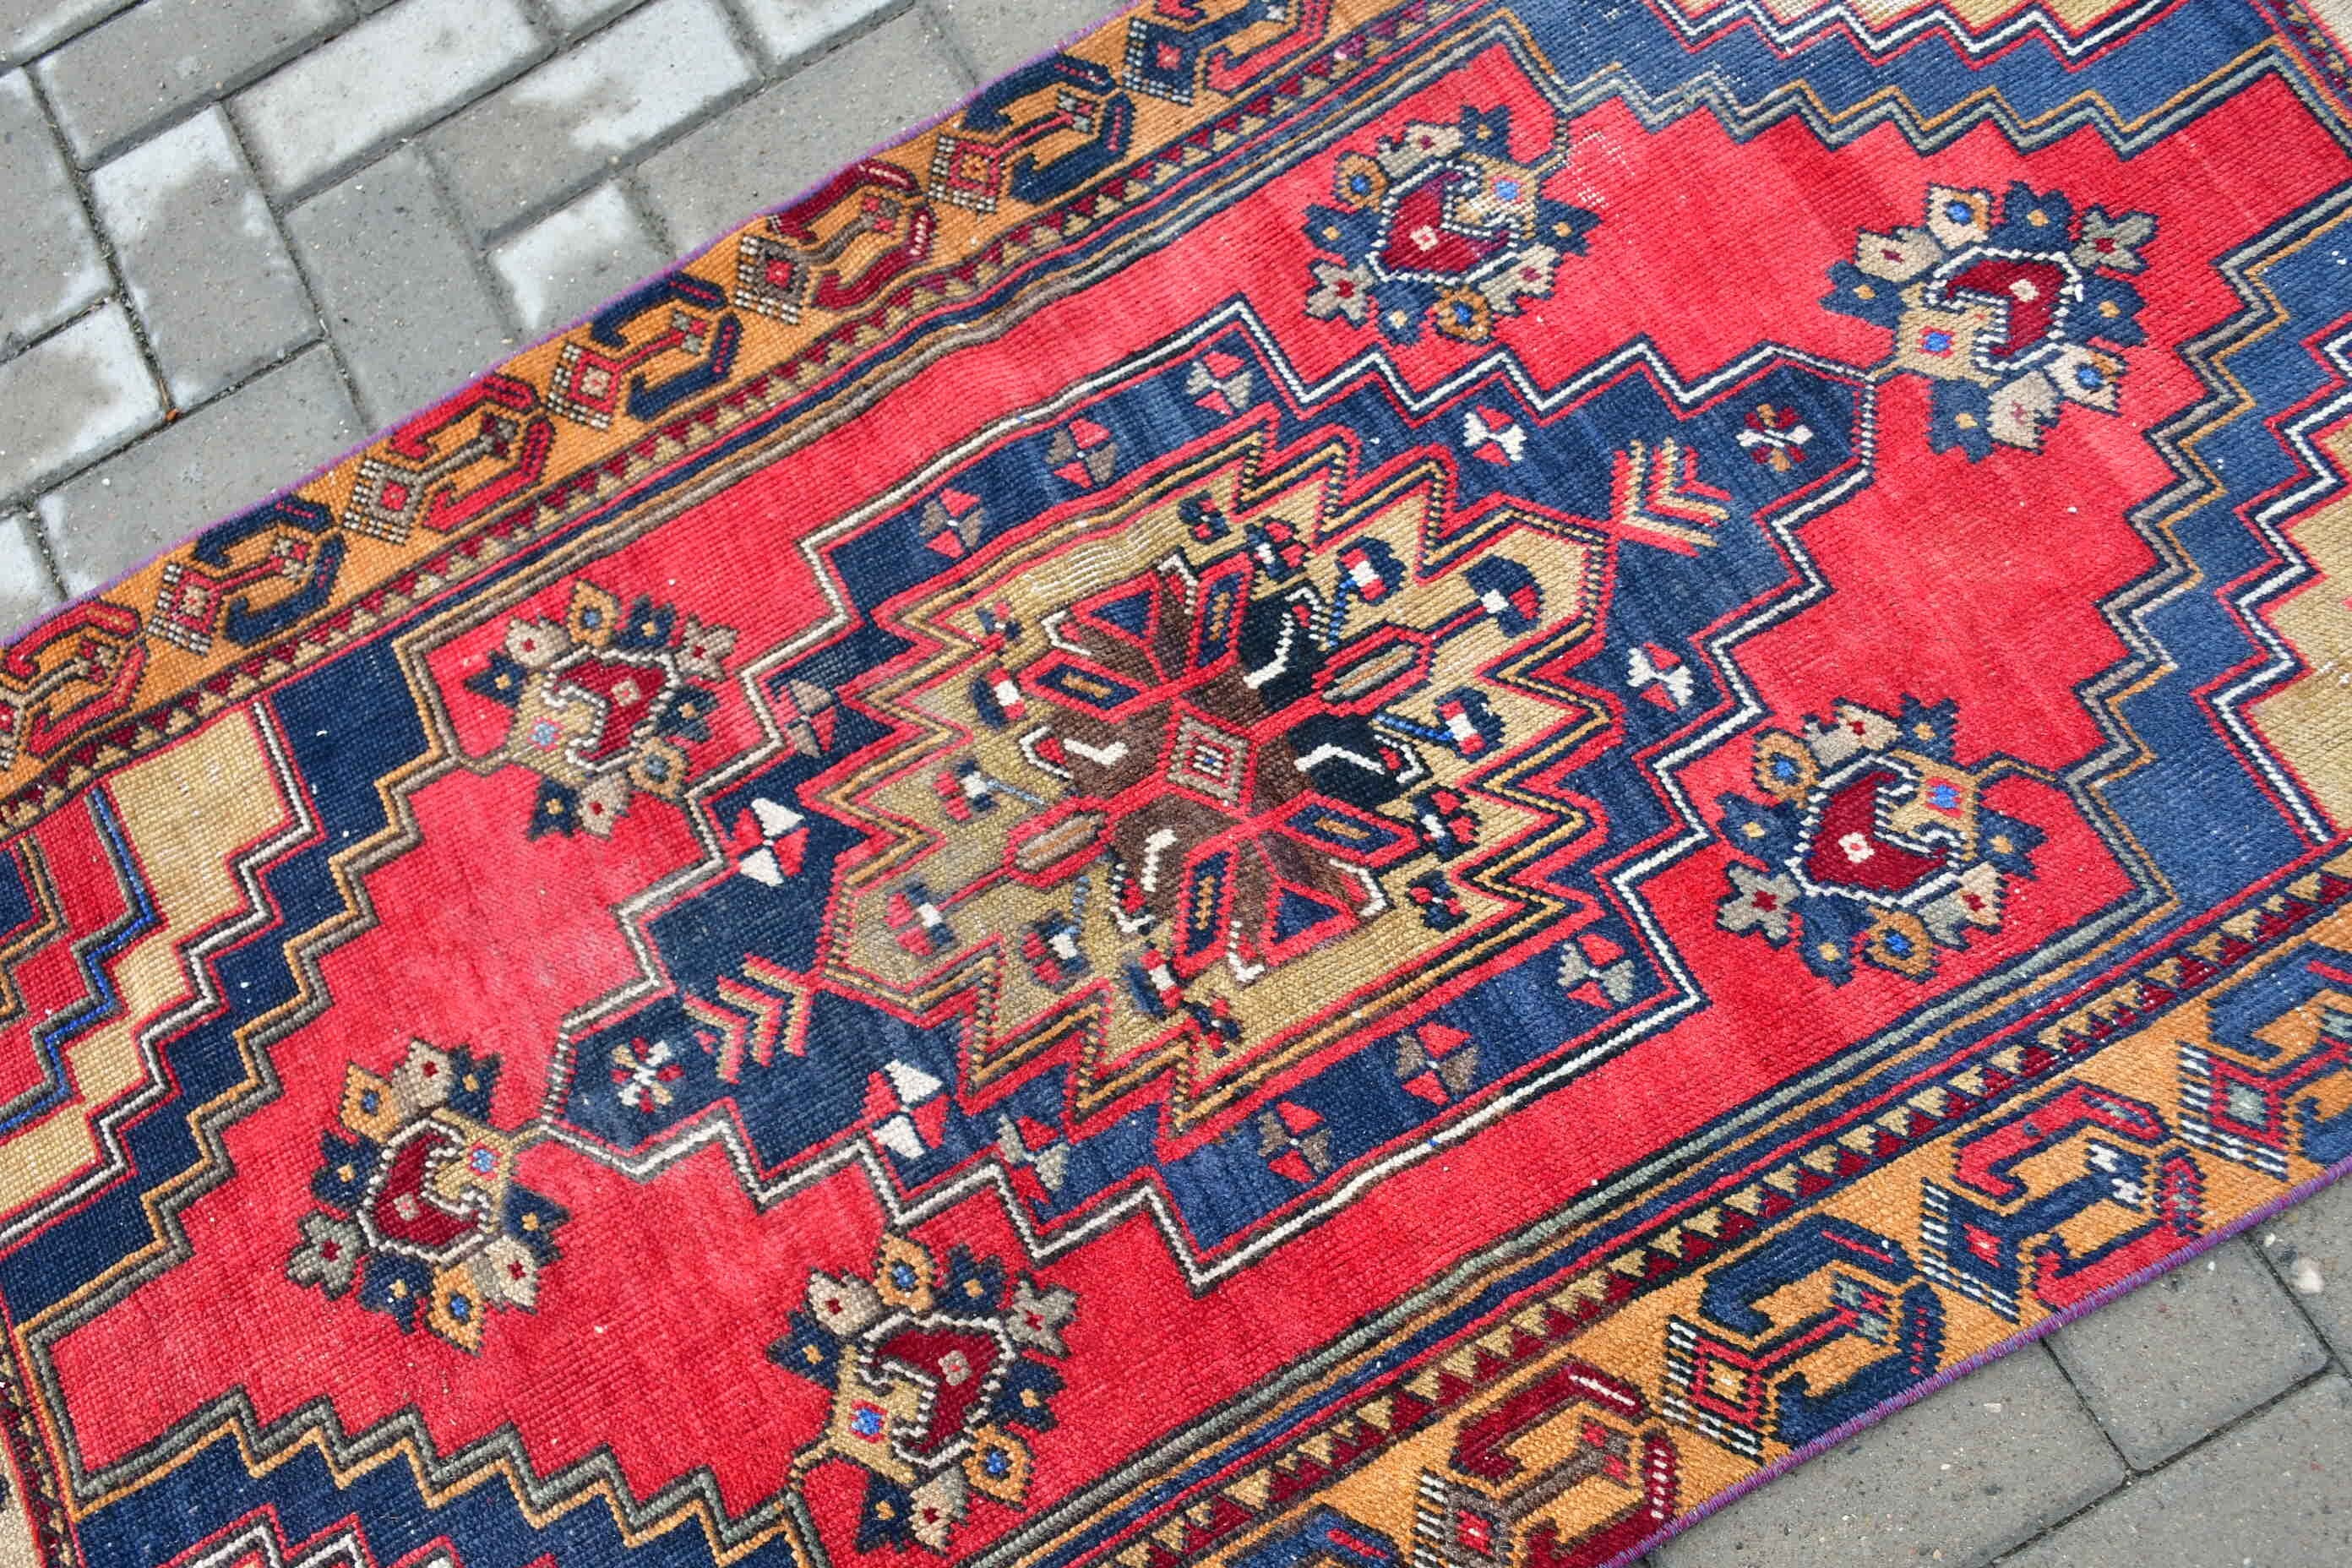 Kitchen Rugs, Nursery Rug, Wool Rug, Red Oushak Rug, Turkish Rug, Rugs for Entry, 2.9x6.1 ft Accent Rugs, Vintage Rug